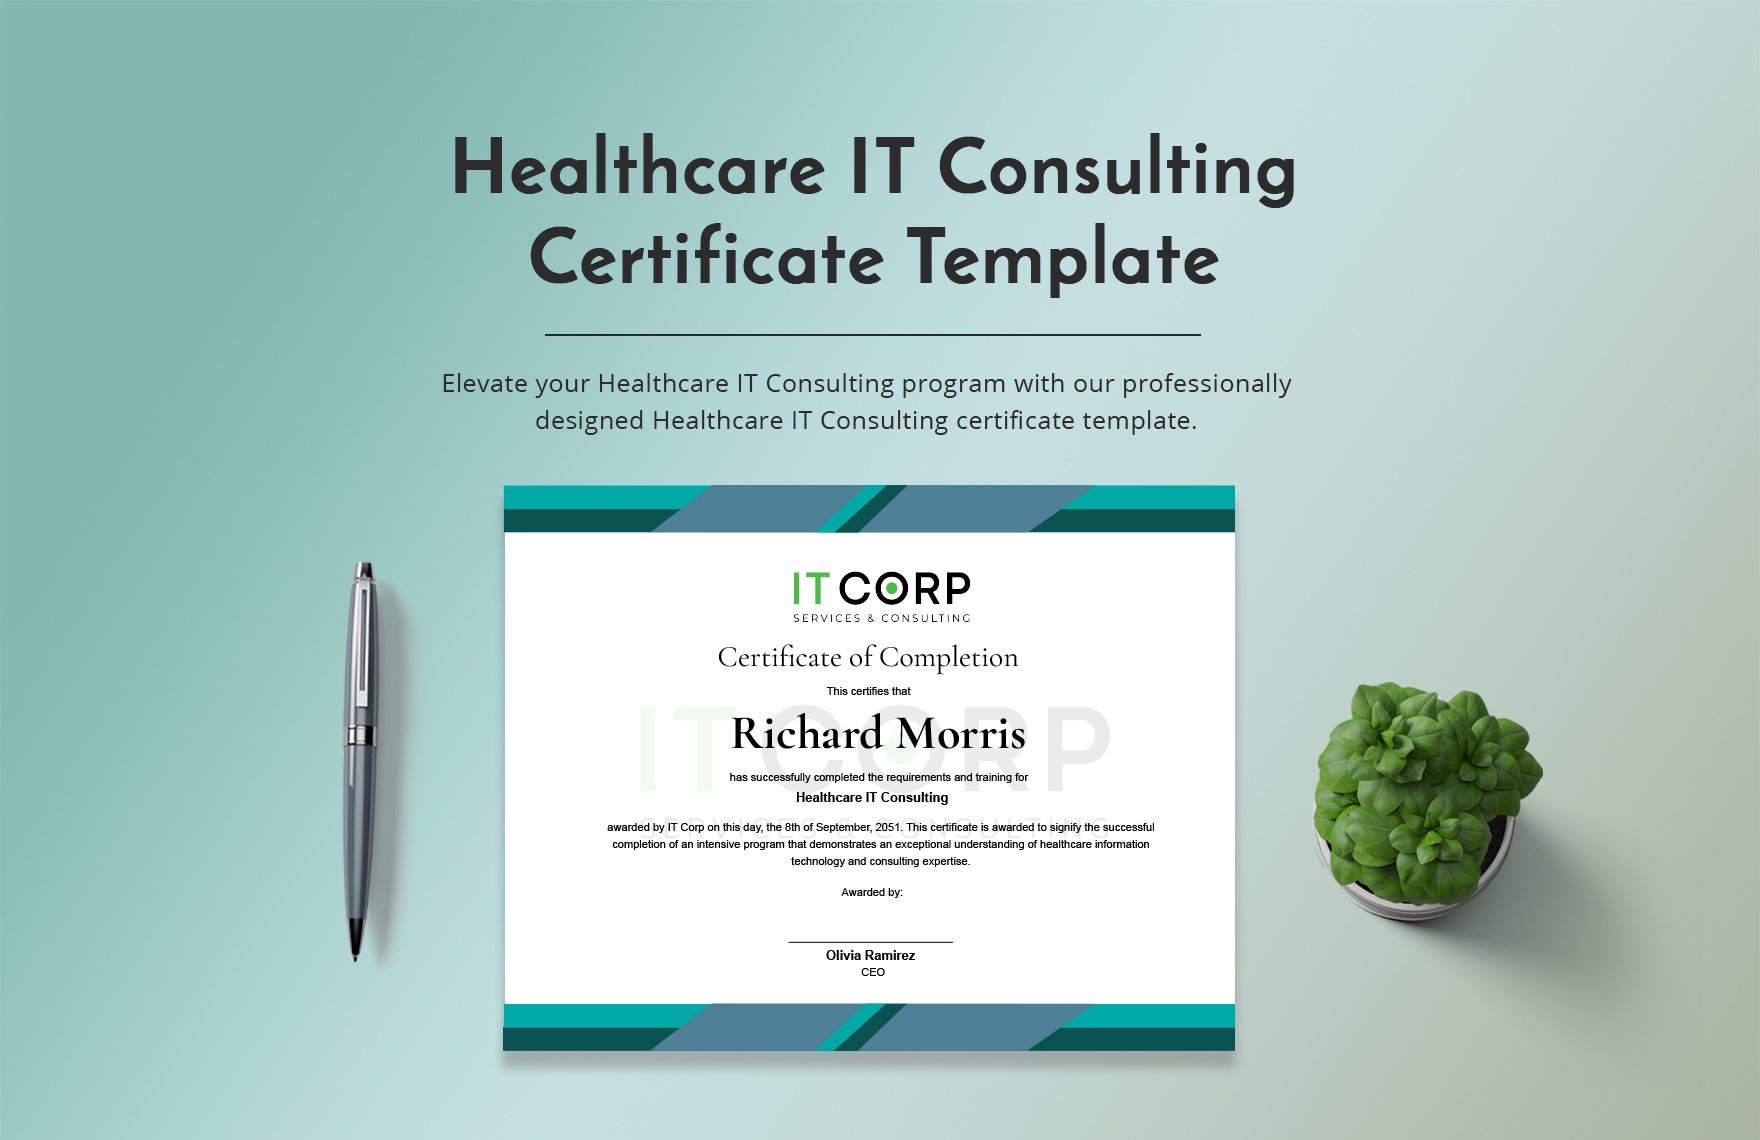 Healthcare IT Consulting Certificate Template in Word, Google Docs, Illustrator, PSD